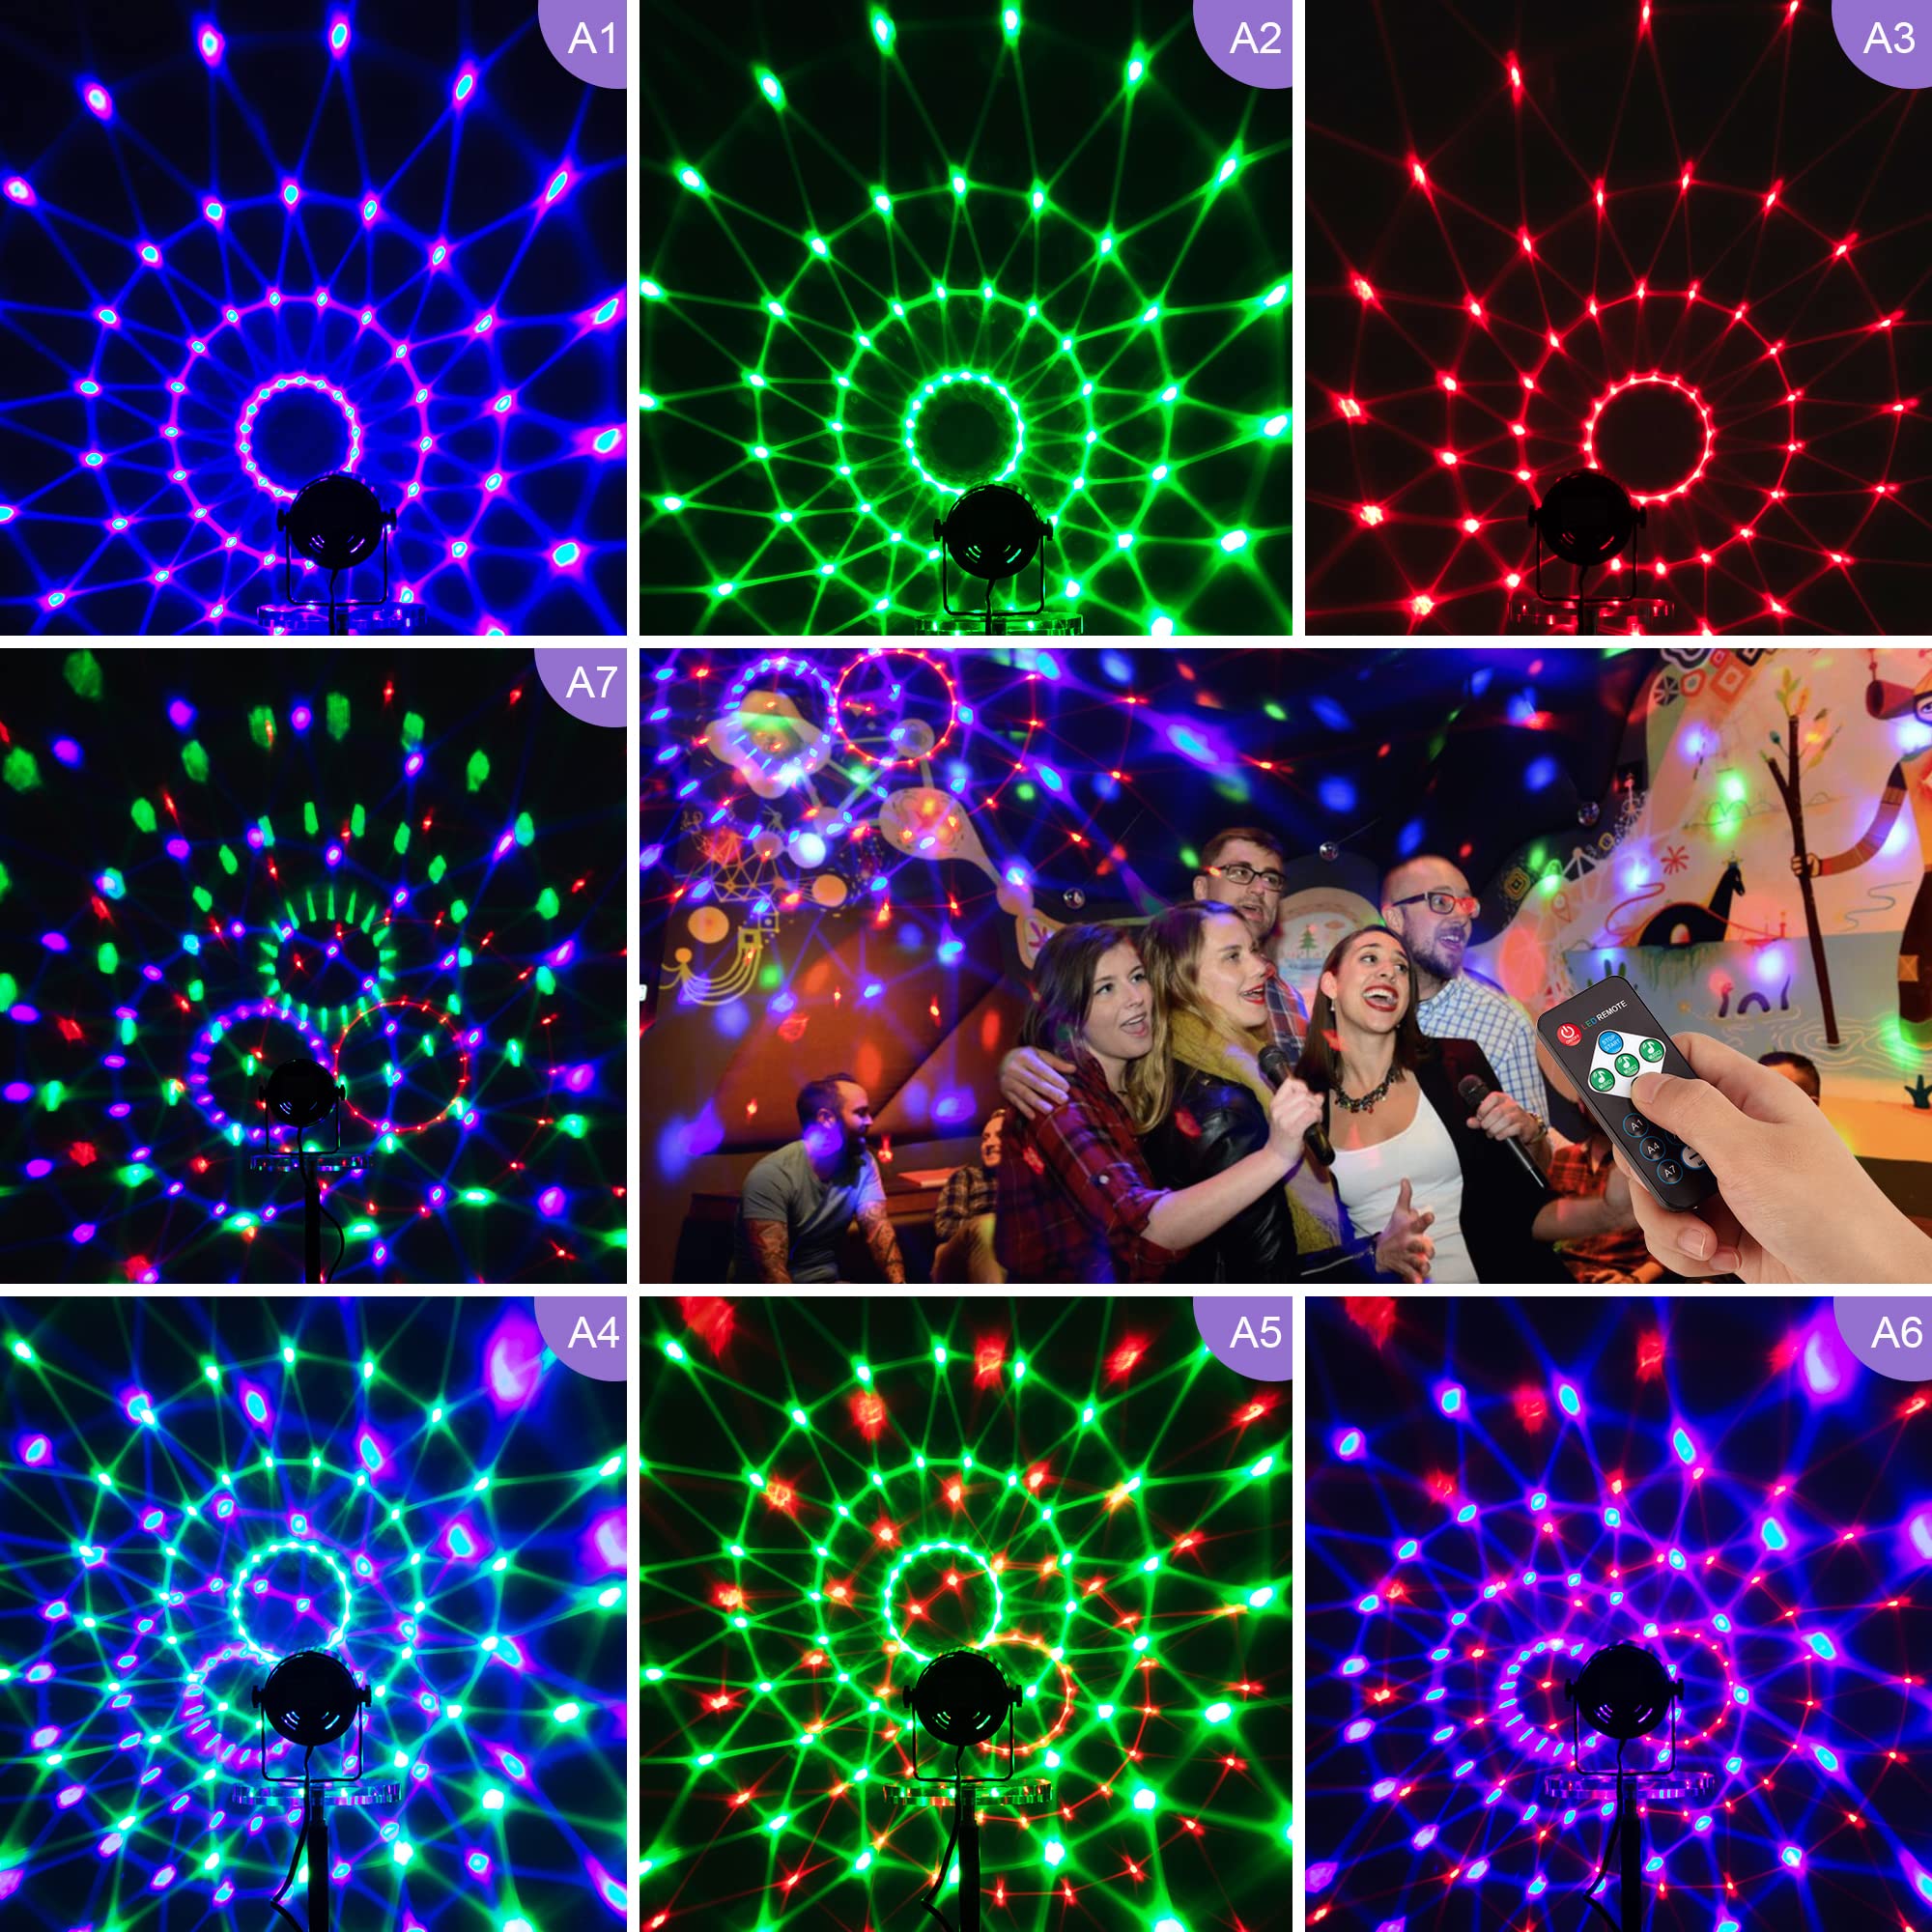 Party Lights Disco Lights, 2 Pack RGB Disco Ball Remote Control DJ Stage Lights 3W 3 Colours 7 Mode Sound Activated Strobe Light for Xmas Party Pub Wedding Club Show